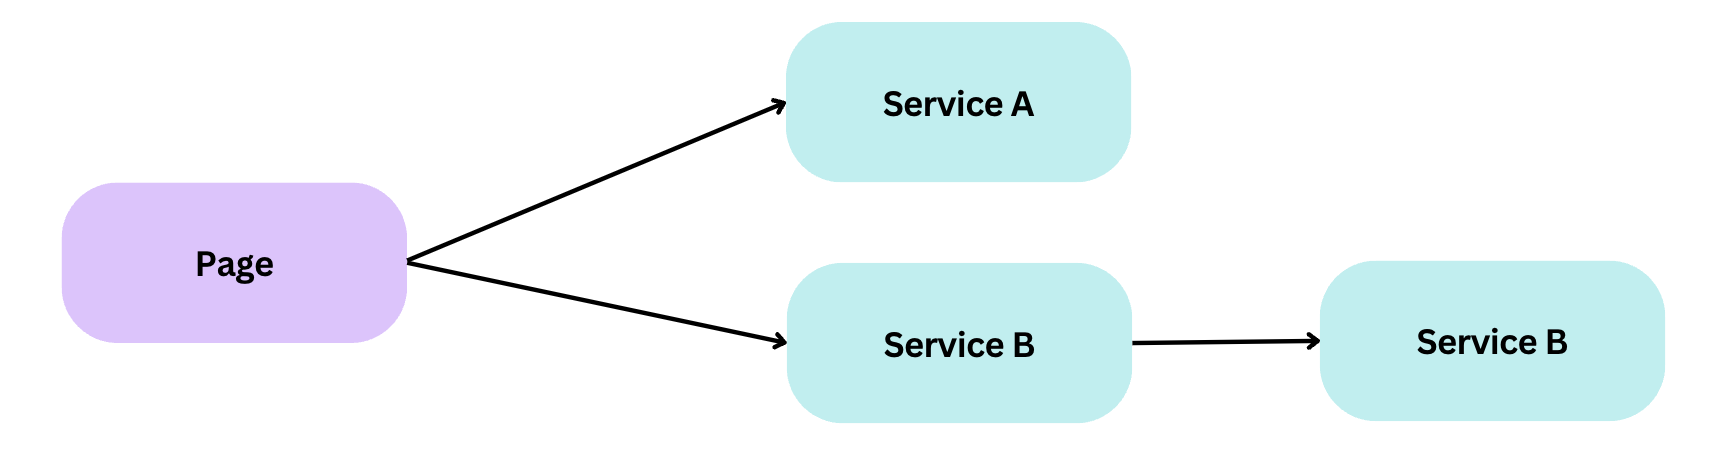 Simplified representation of a service graph